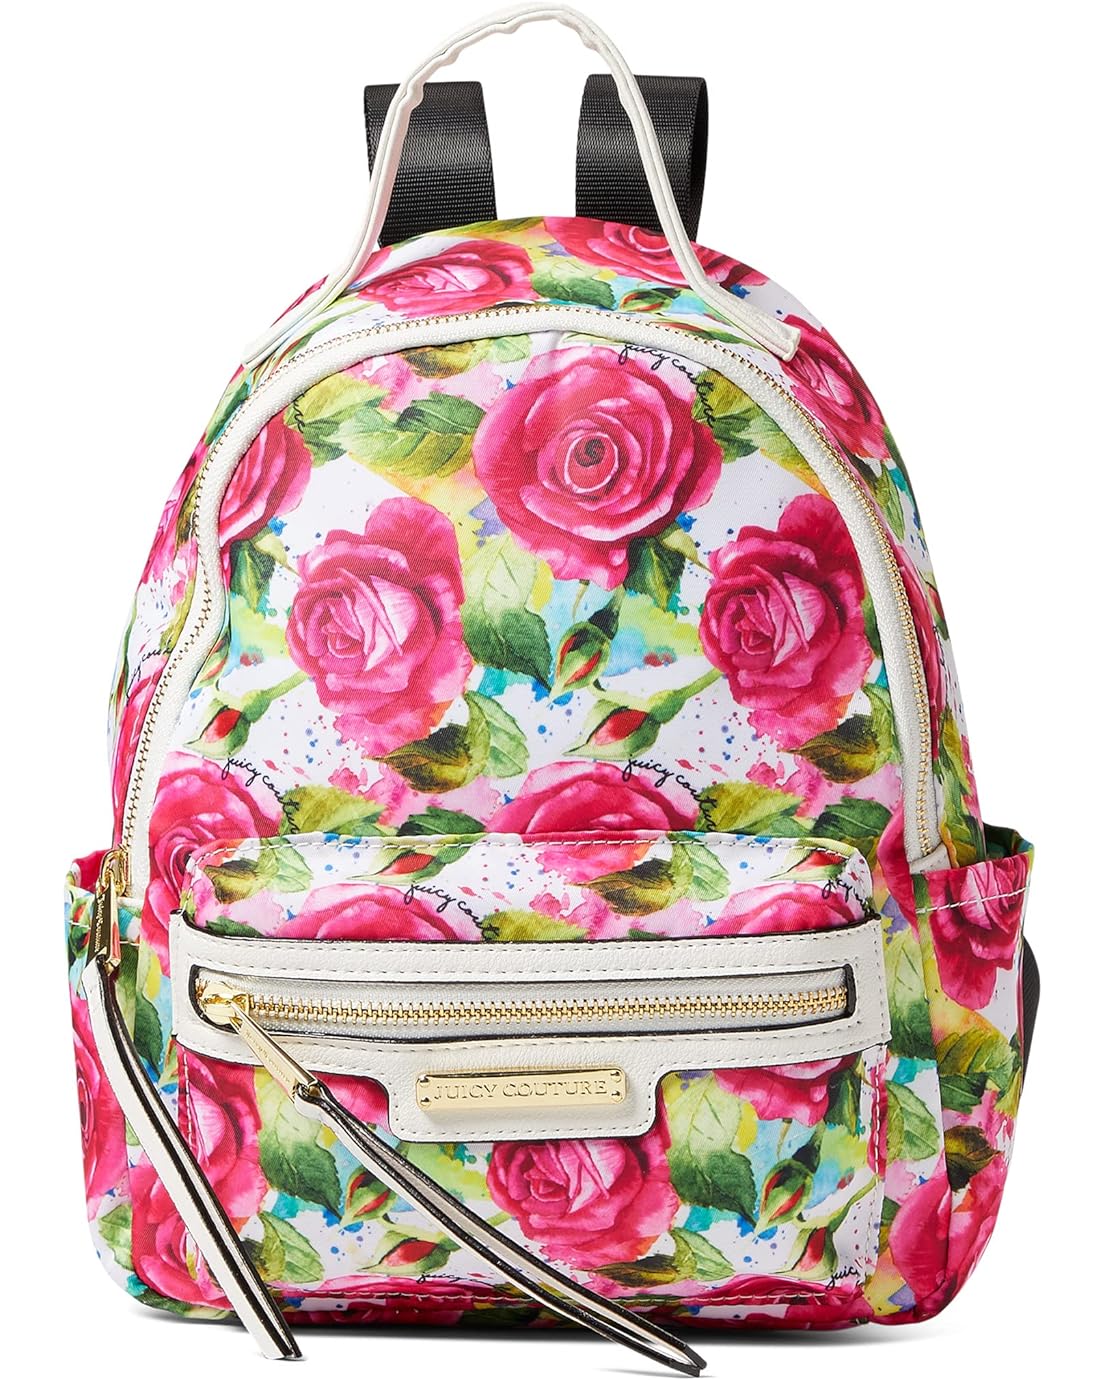 Juicy Couture Best Sellers Mini Backpack